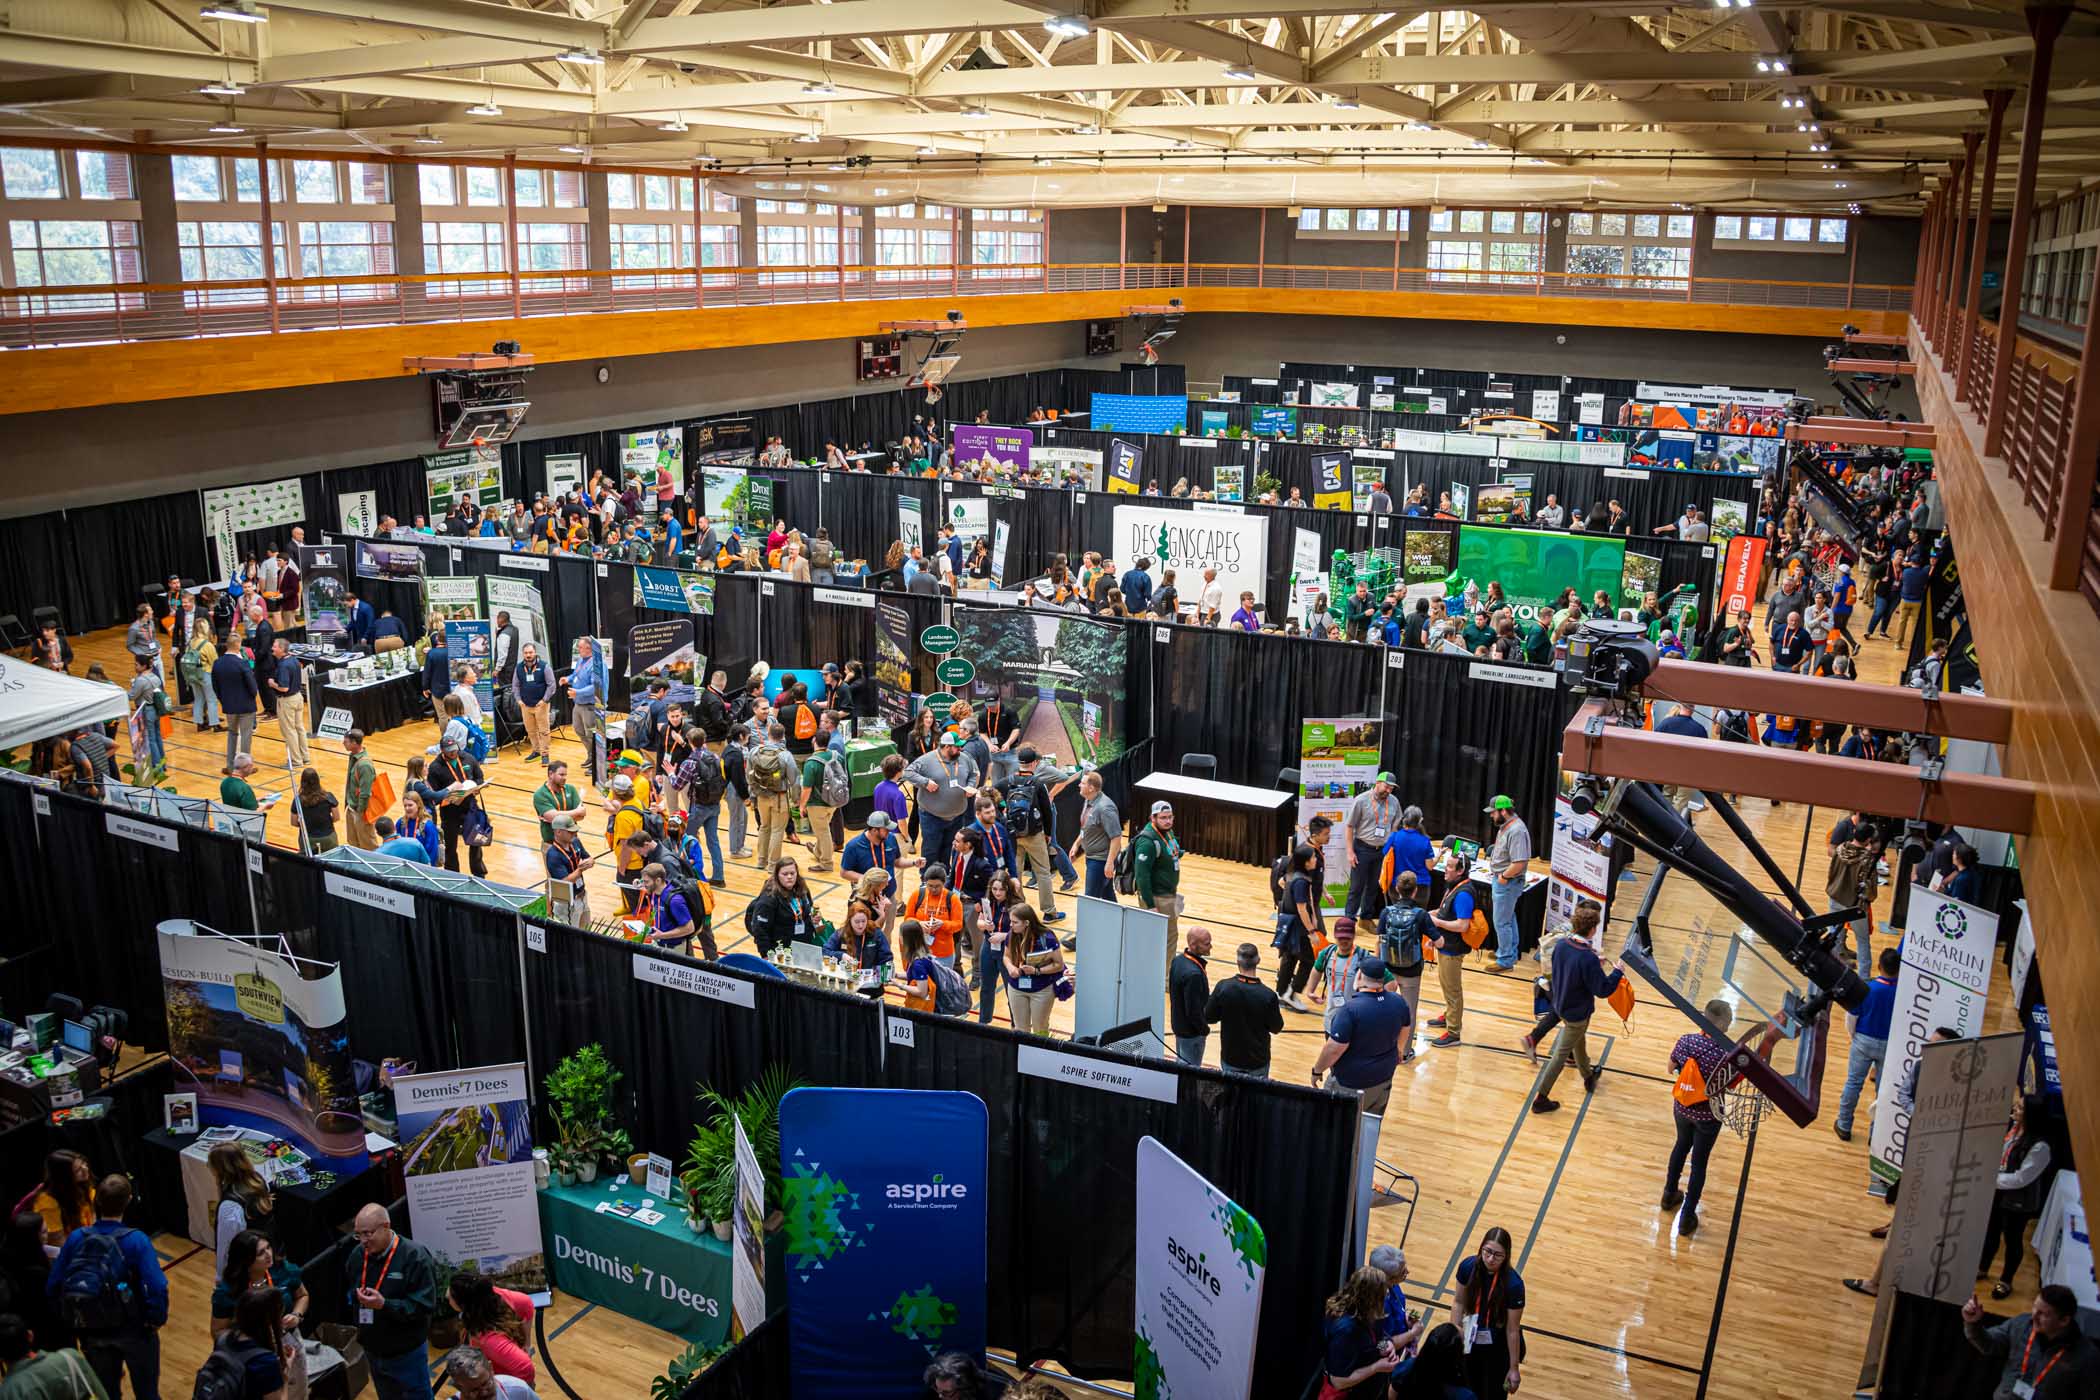 More than 600 students convened at MSU this week for the National Collegiate Landscape Competition. The 47th annual event, billed as the largest career fair in the industry, once again returned to its roots at MSU as students from 47 schools participated in real-world, competitive events. Here, attendees participate in the career fair located at the Sanderson Center on Thursday, March 16, 2023. (Photo by David Ammon) 